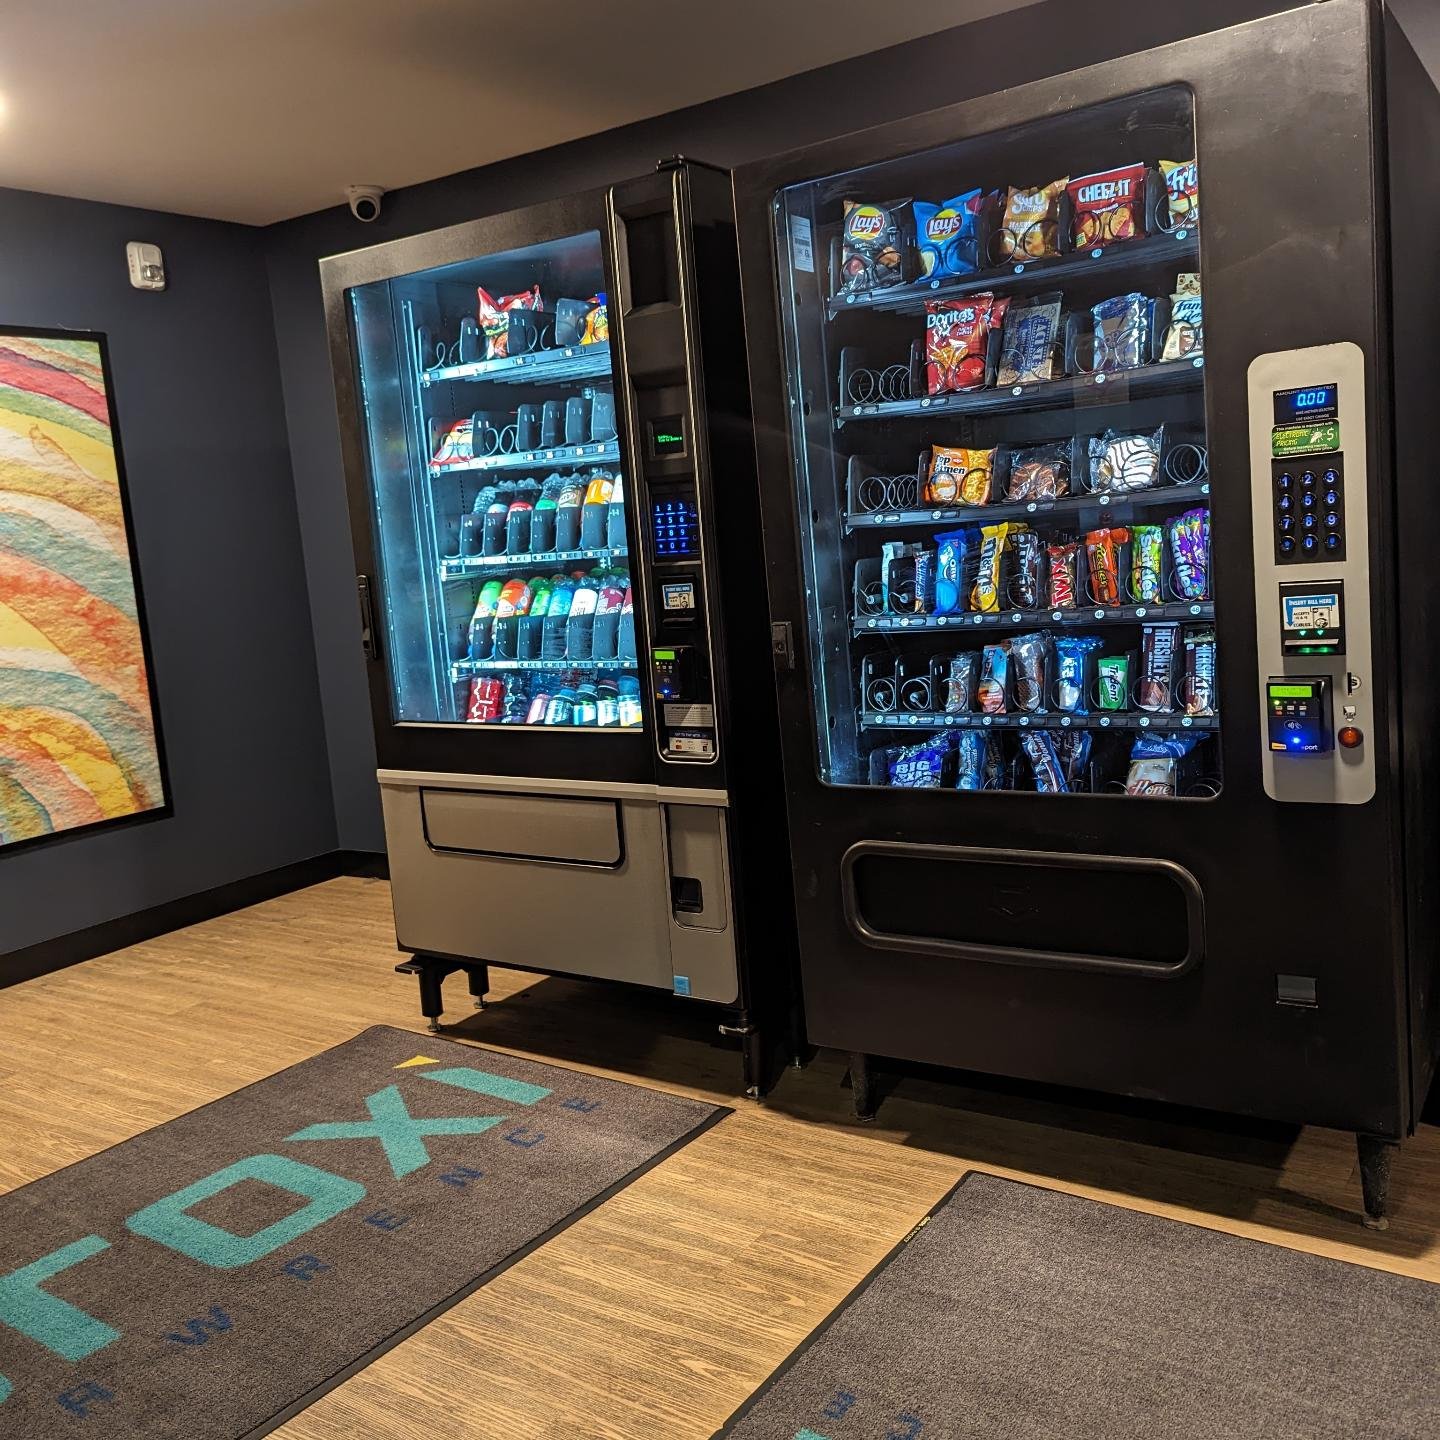 Have you heard? 
&bull;
&bull;
Proxi has vending machines now! Located in the elevator lobby 🤯